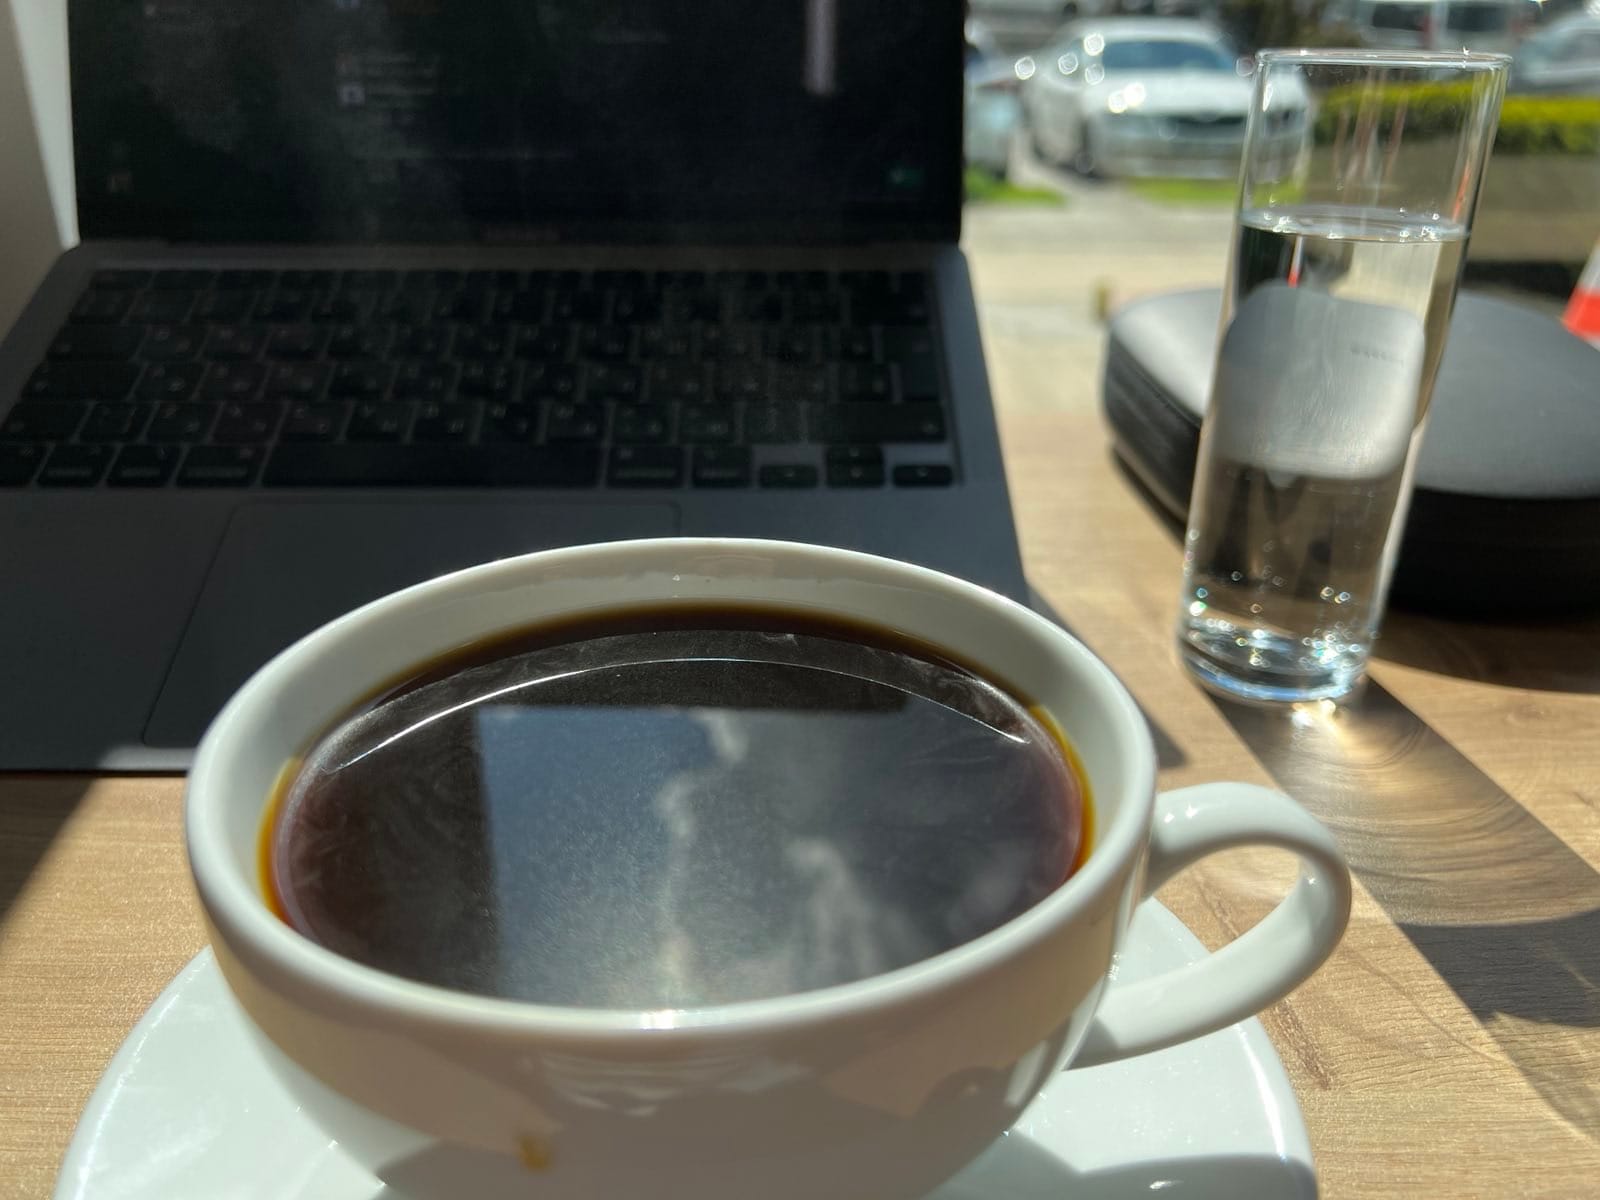 Everything is usual on this photo: a Mac, a cup of coffee, a glass of water